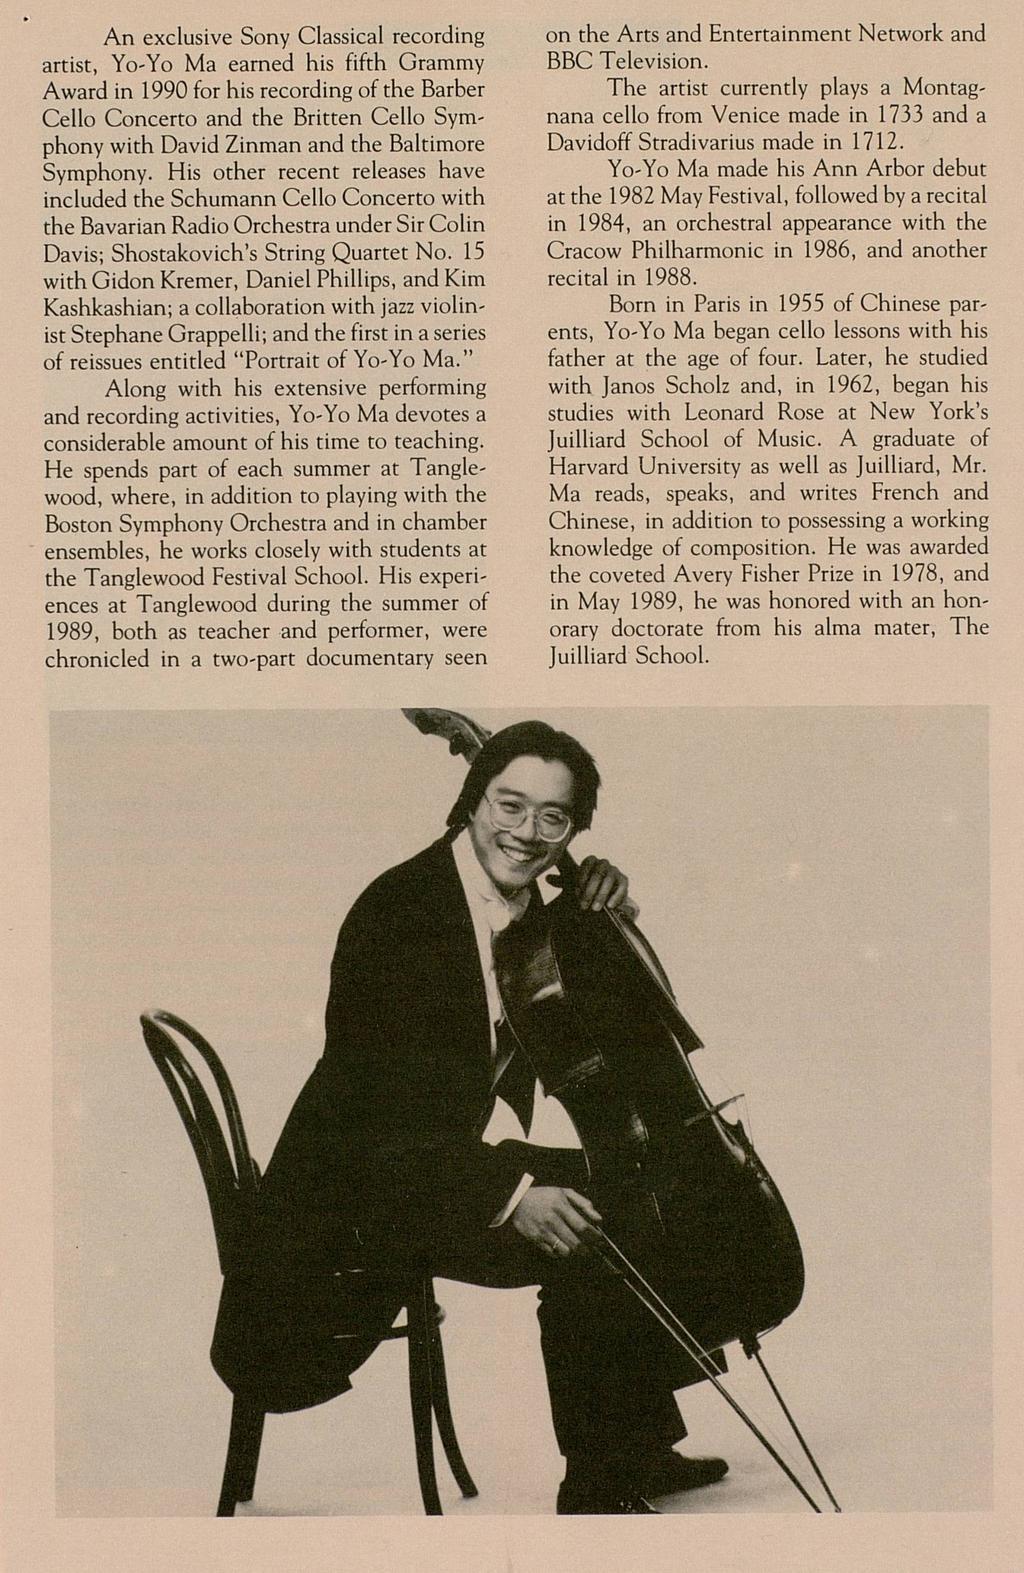 An exclusive Sony Classical recording artist, Yo-Yo Ma earned his fifth Grammy Award in 1990 for his recording of the Barber Cello Concerto and the Britten Cello Symphony with David Zinman and the